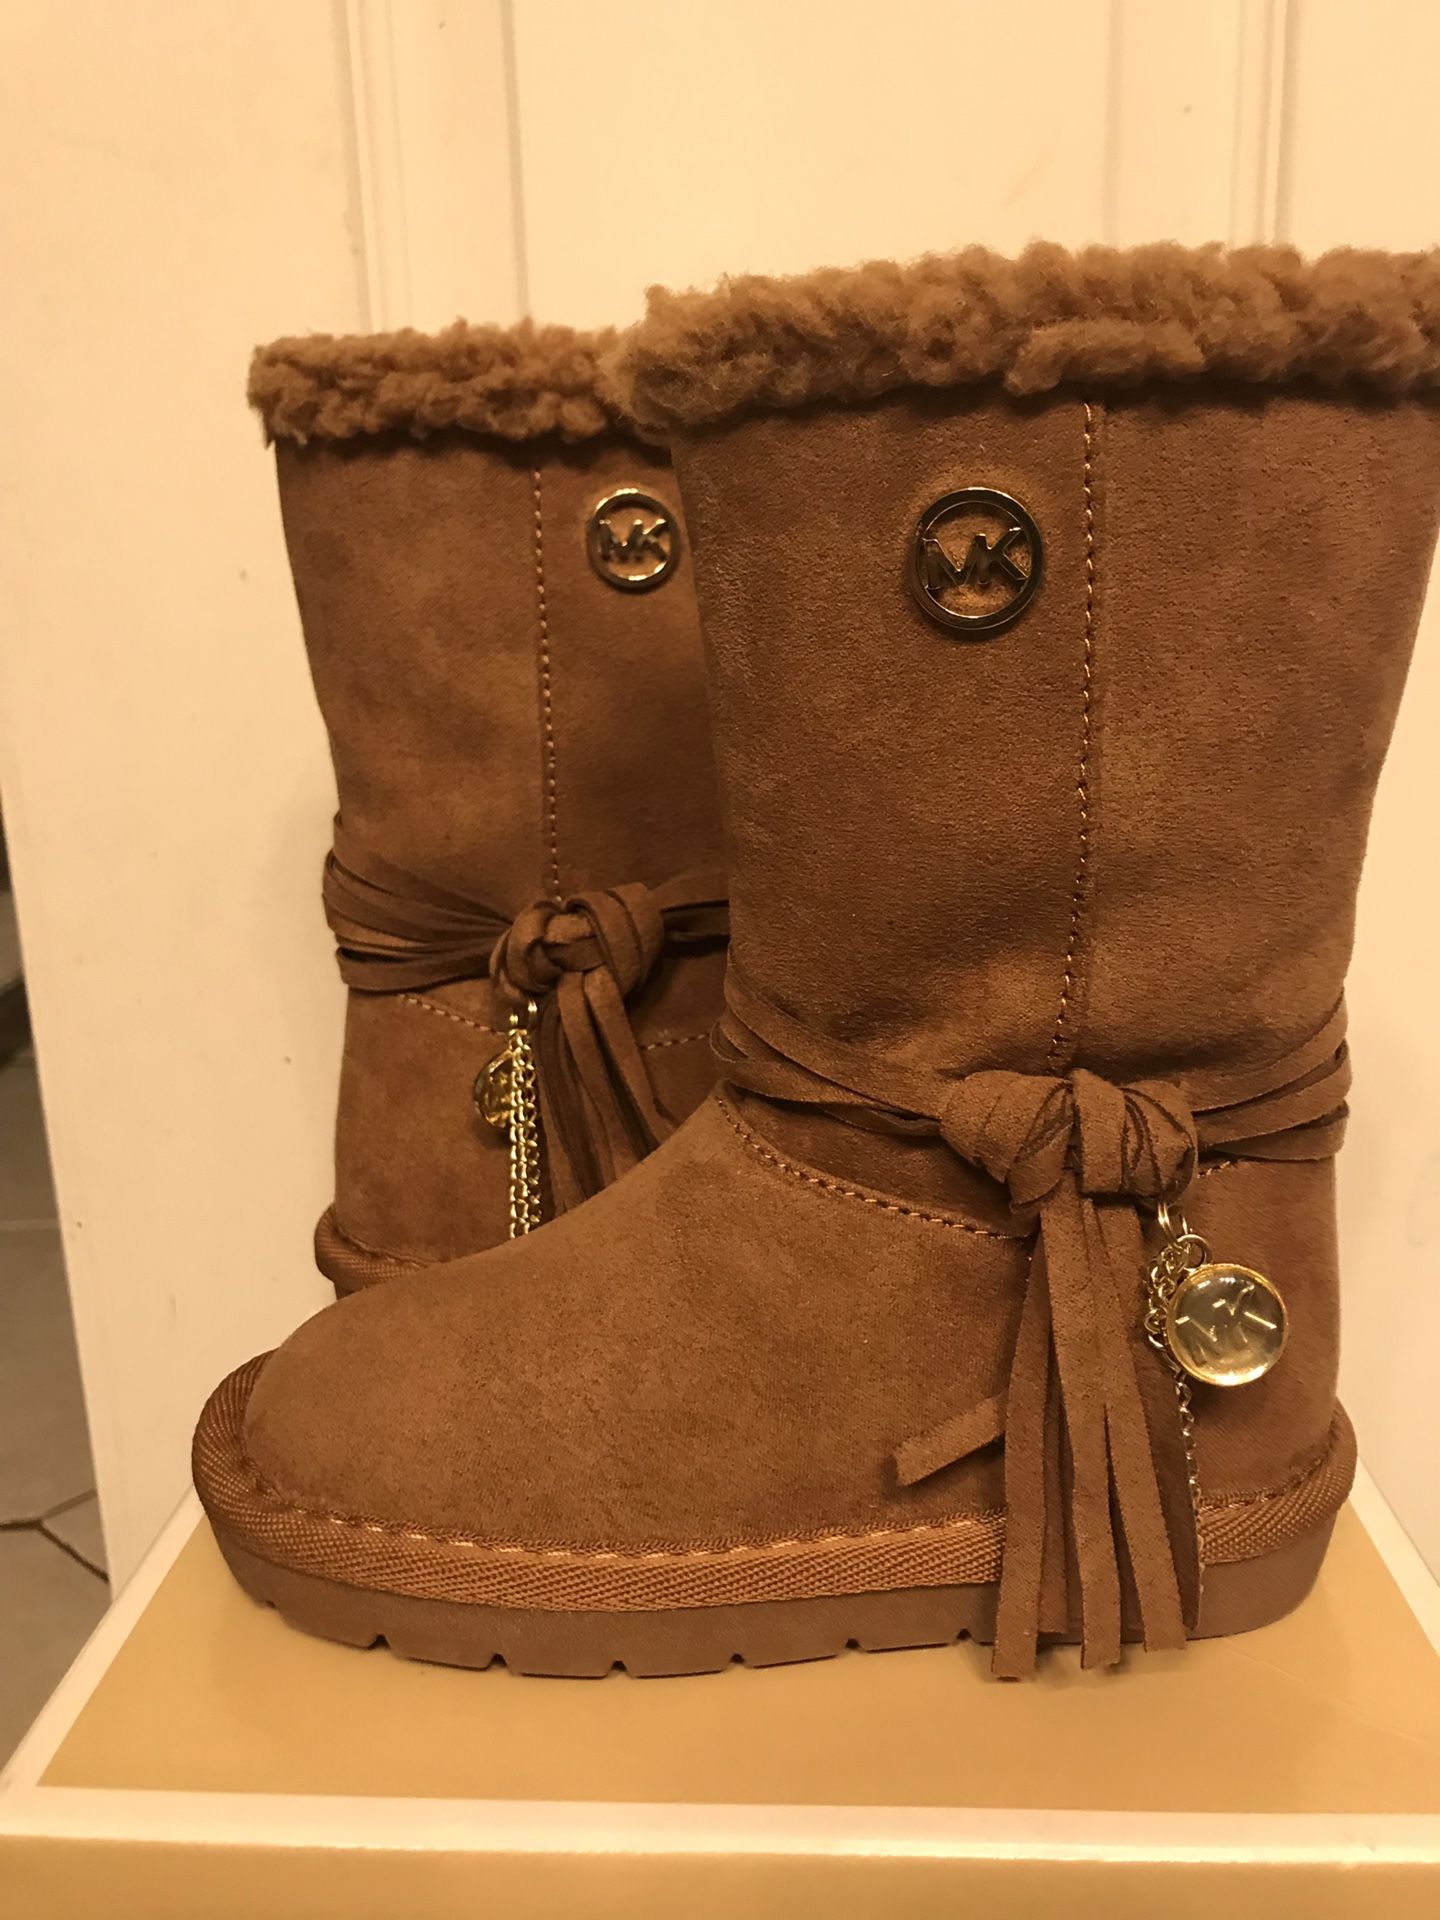 Michael Kors Boots toddler size 7